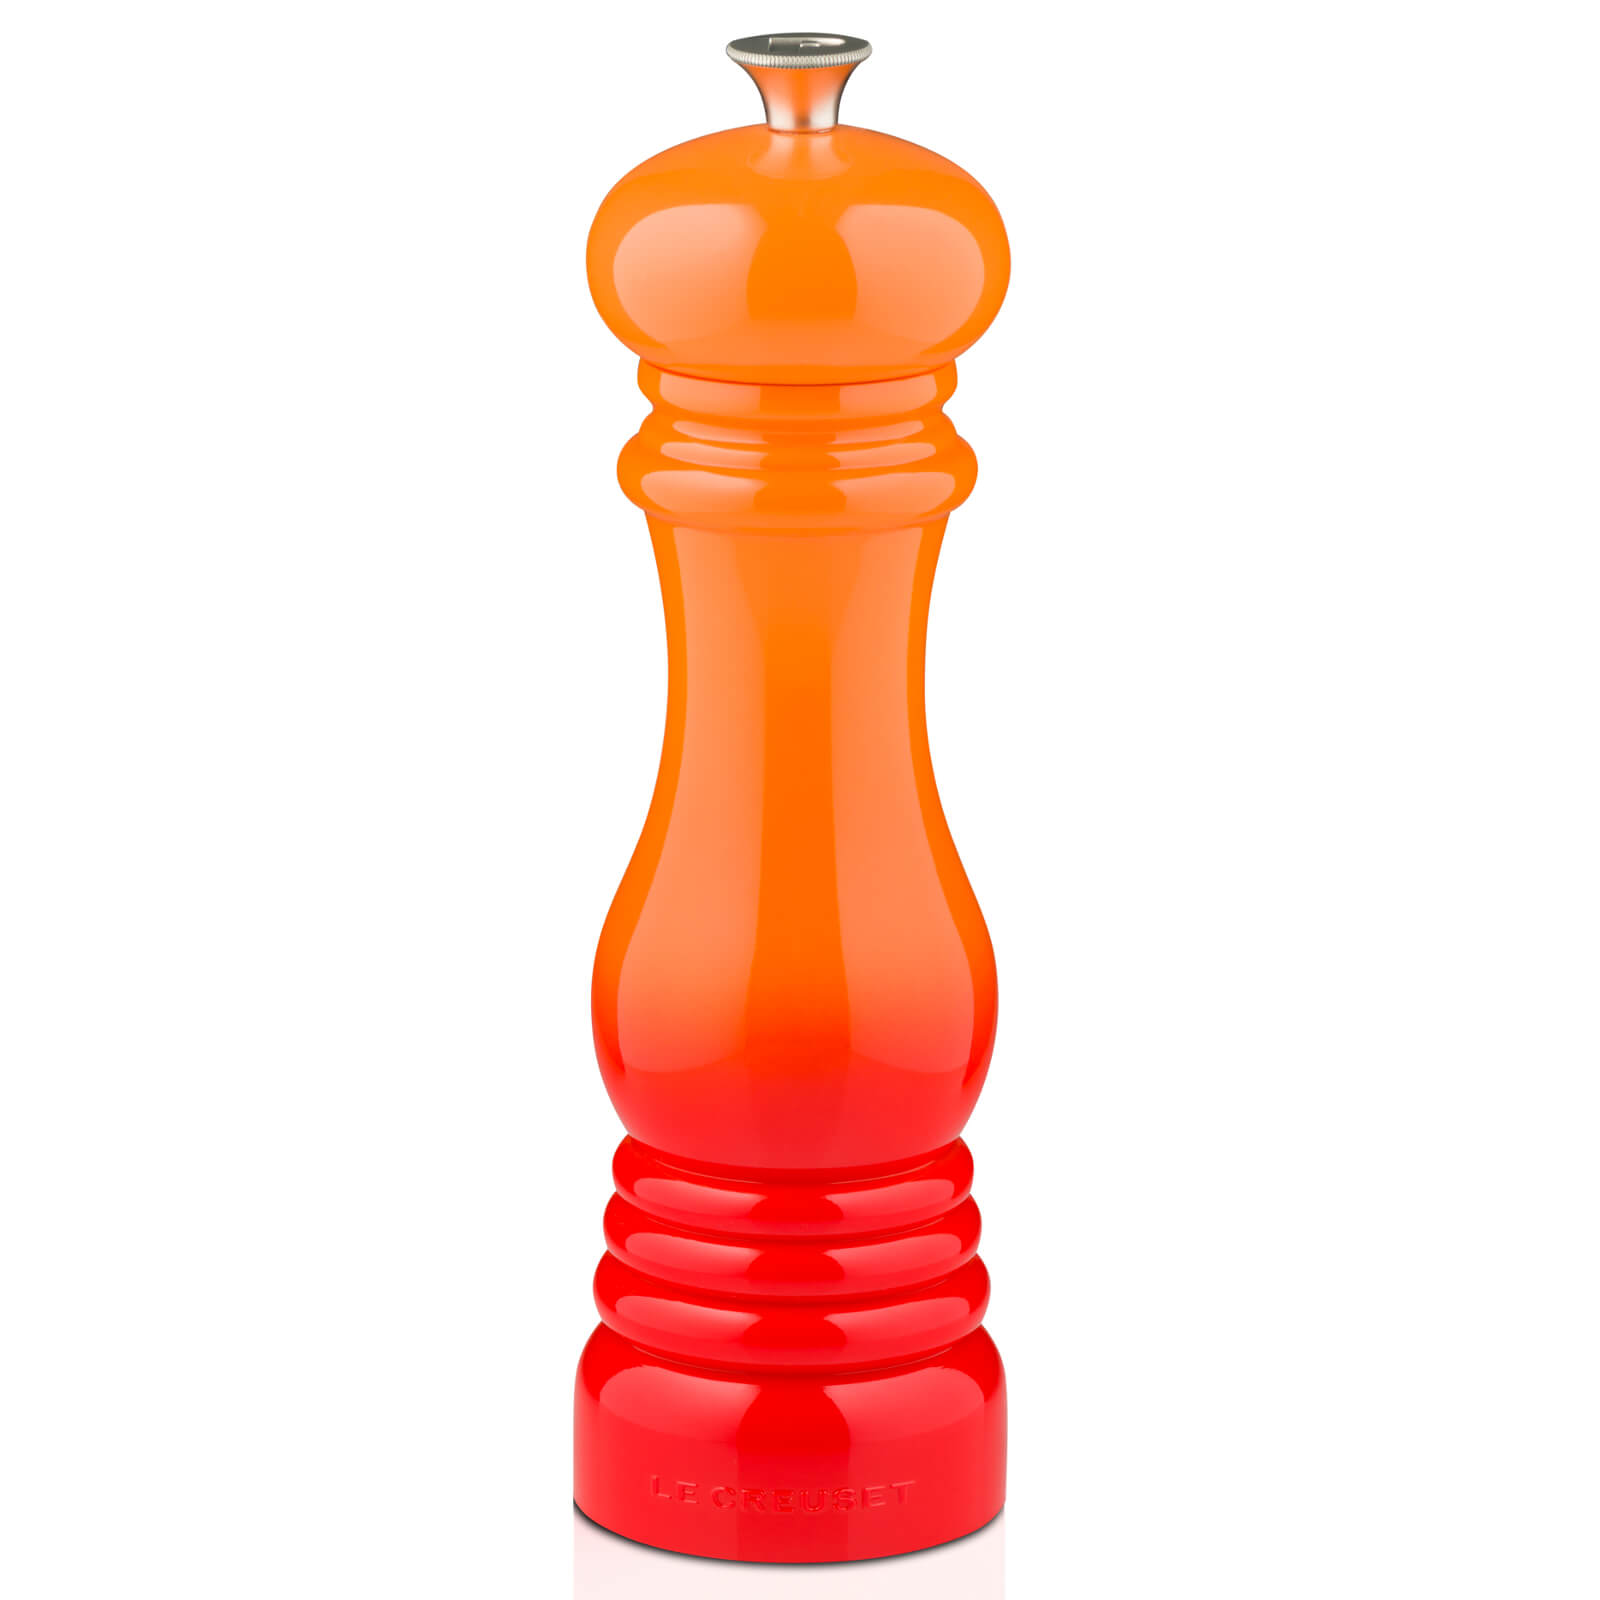 Photos - Other tableware Le Creuset Classic Pepper Mill - Volcanic 9600190009 